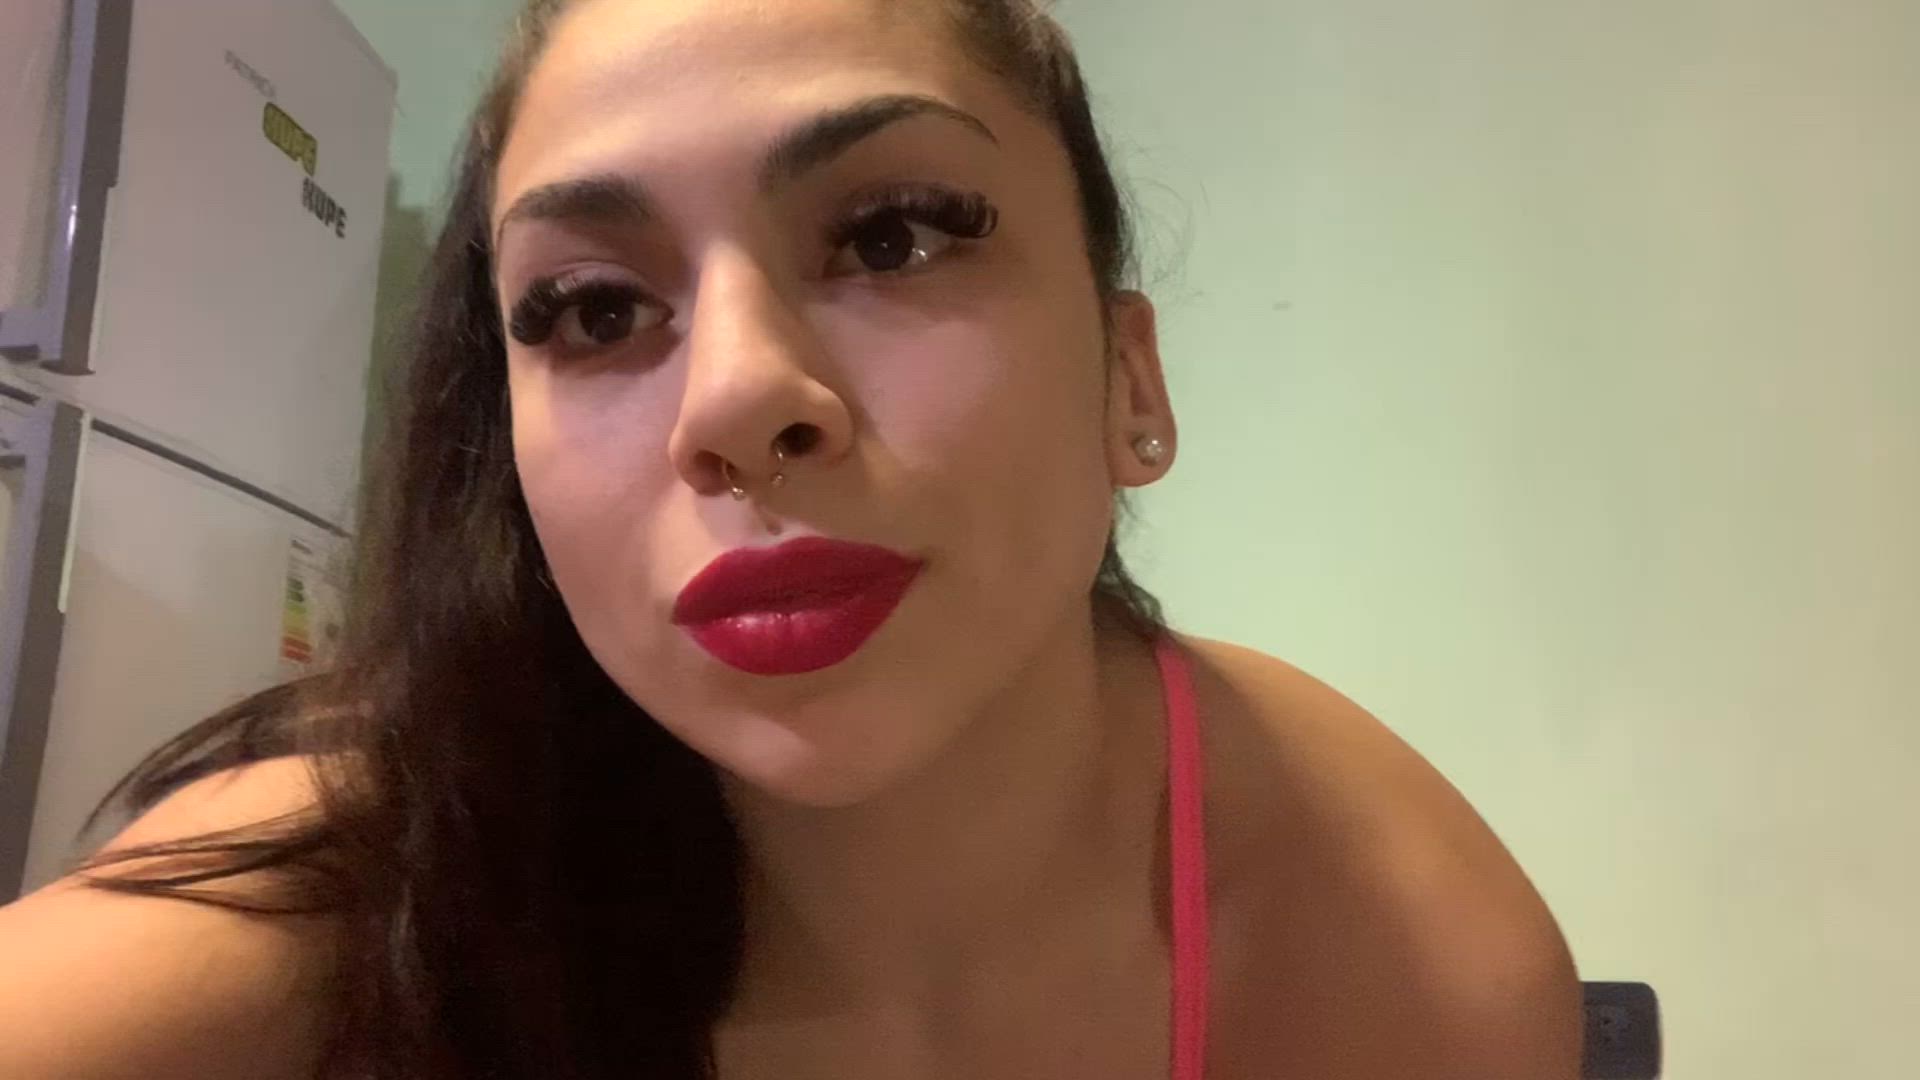 Ass porn video with onlyfans model natalybabyy <strong>@natalybabyy</strong>